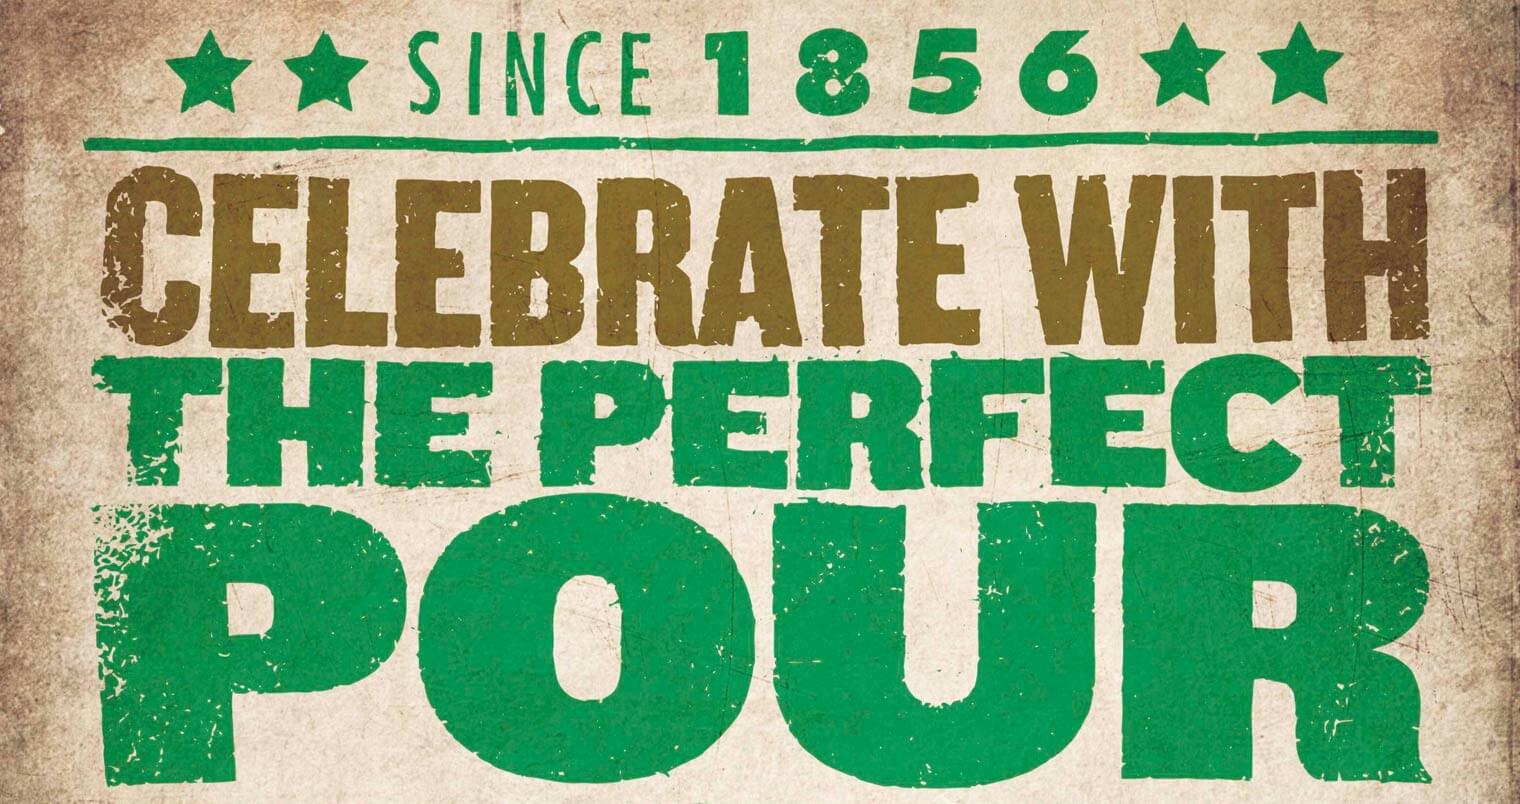 "Celebrate with the Perfect Pour", featured image